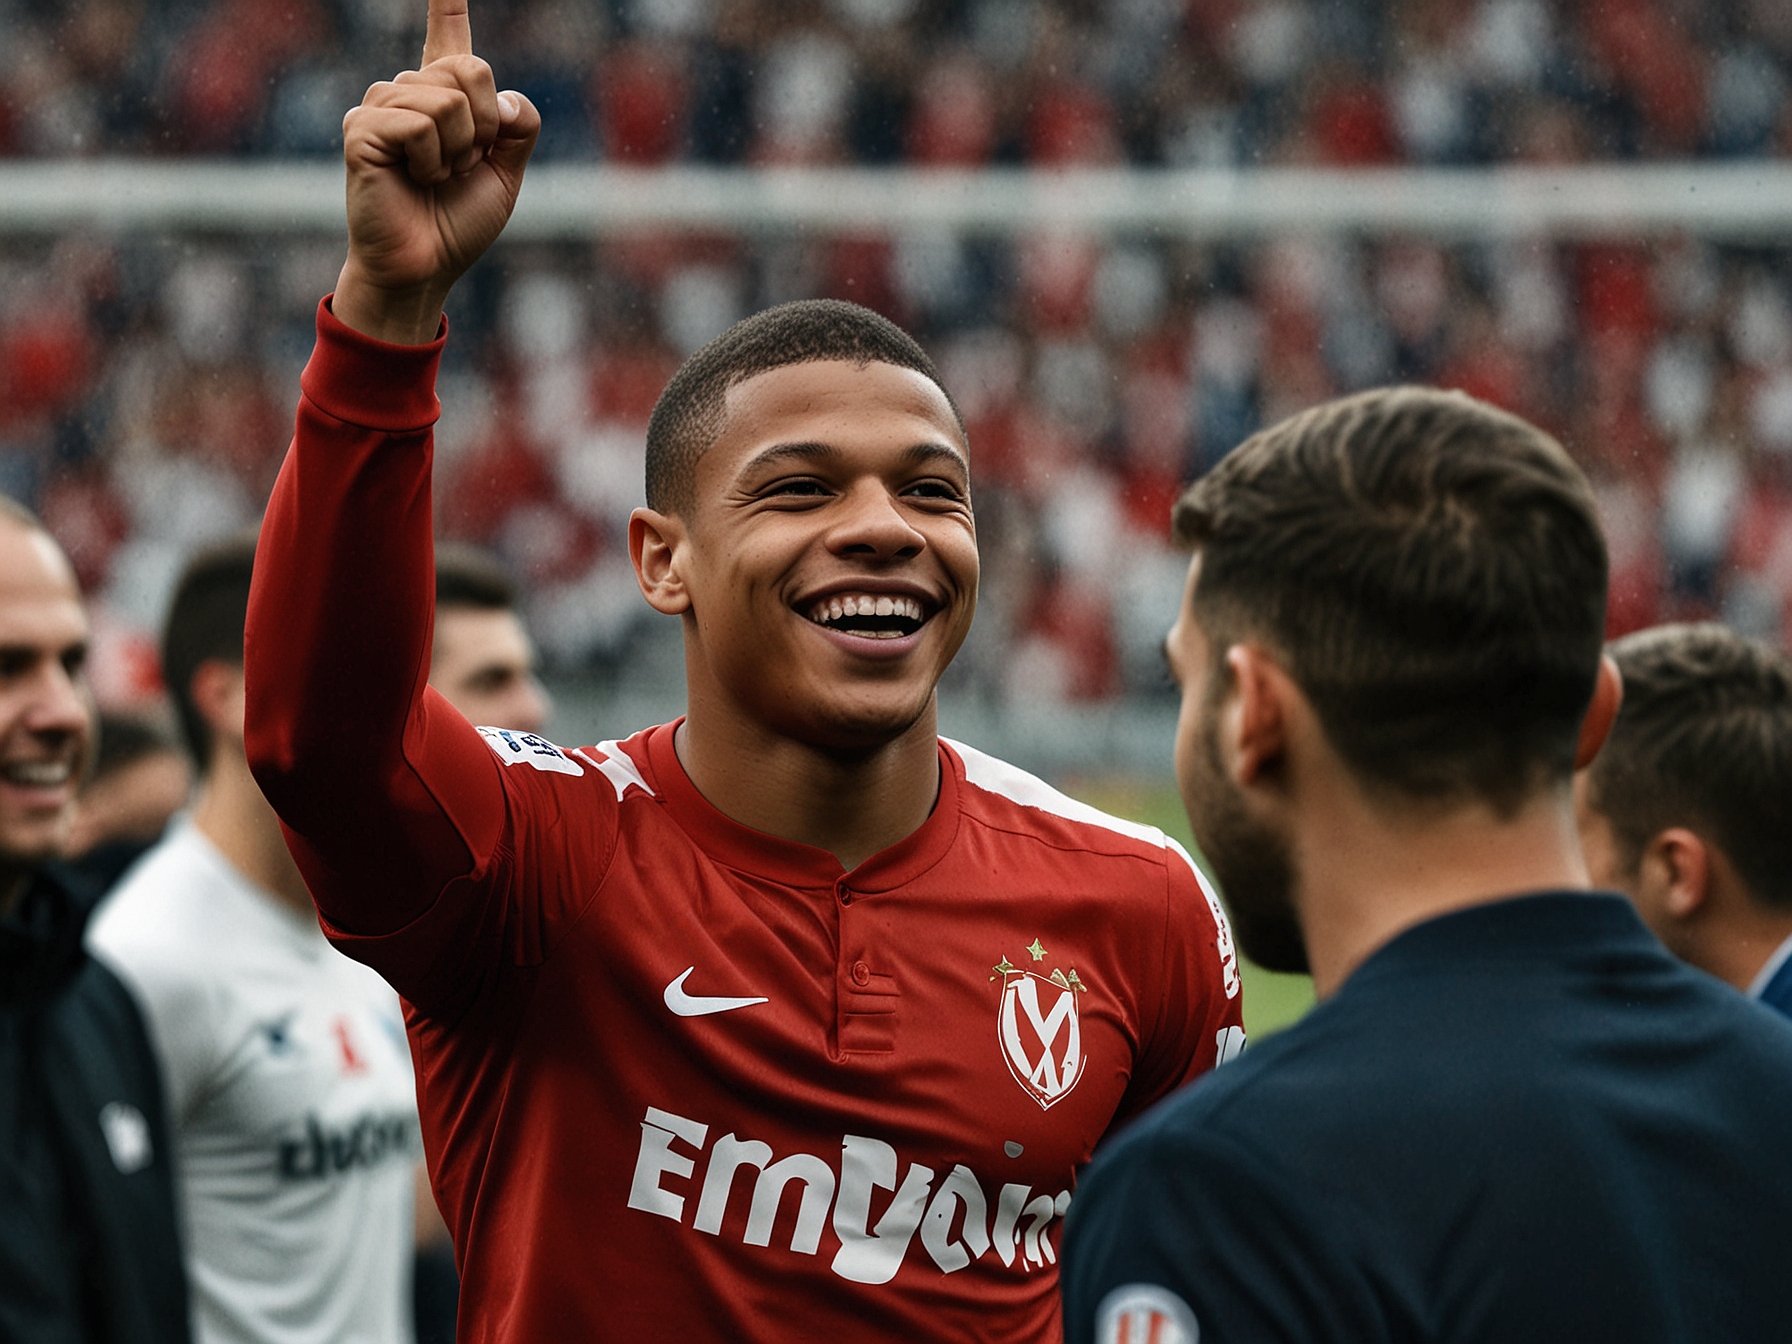 An illustration of Kylian Mbappe celebrating his hat-trick during AS Monaco's 5-0 victory over Metz in February 2017, capturing the moment he announced his arrival on the European stage.